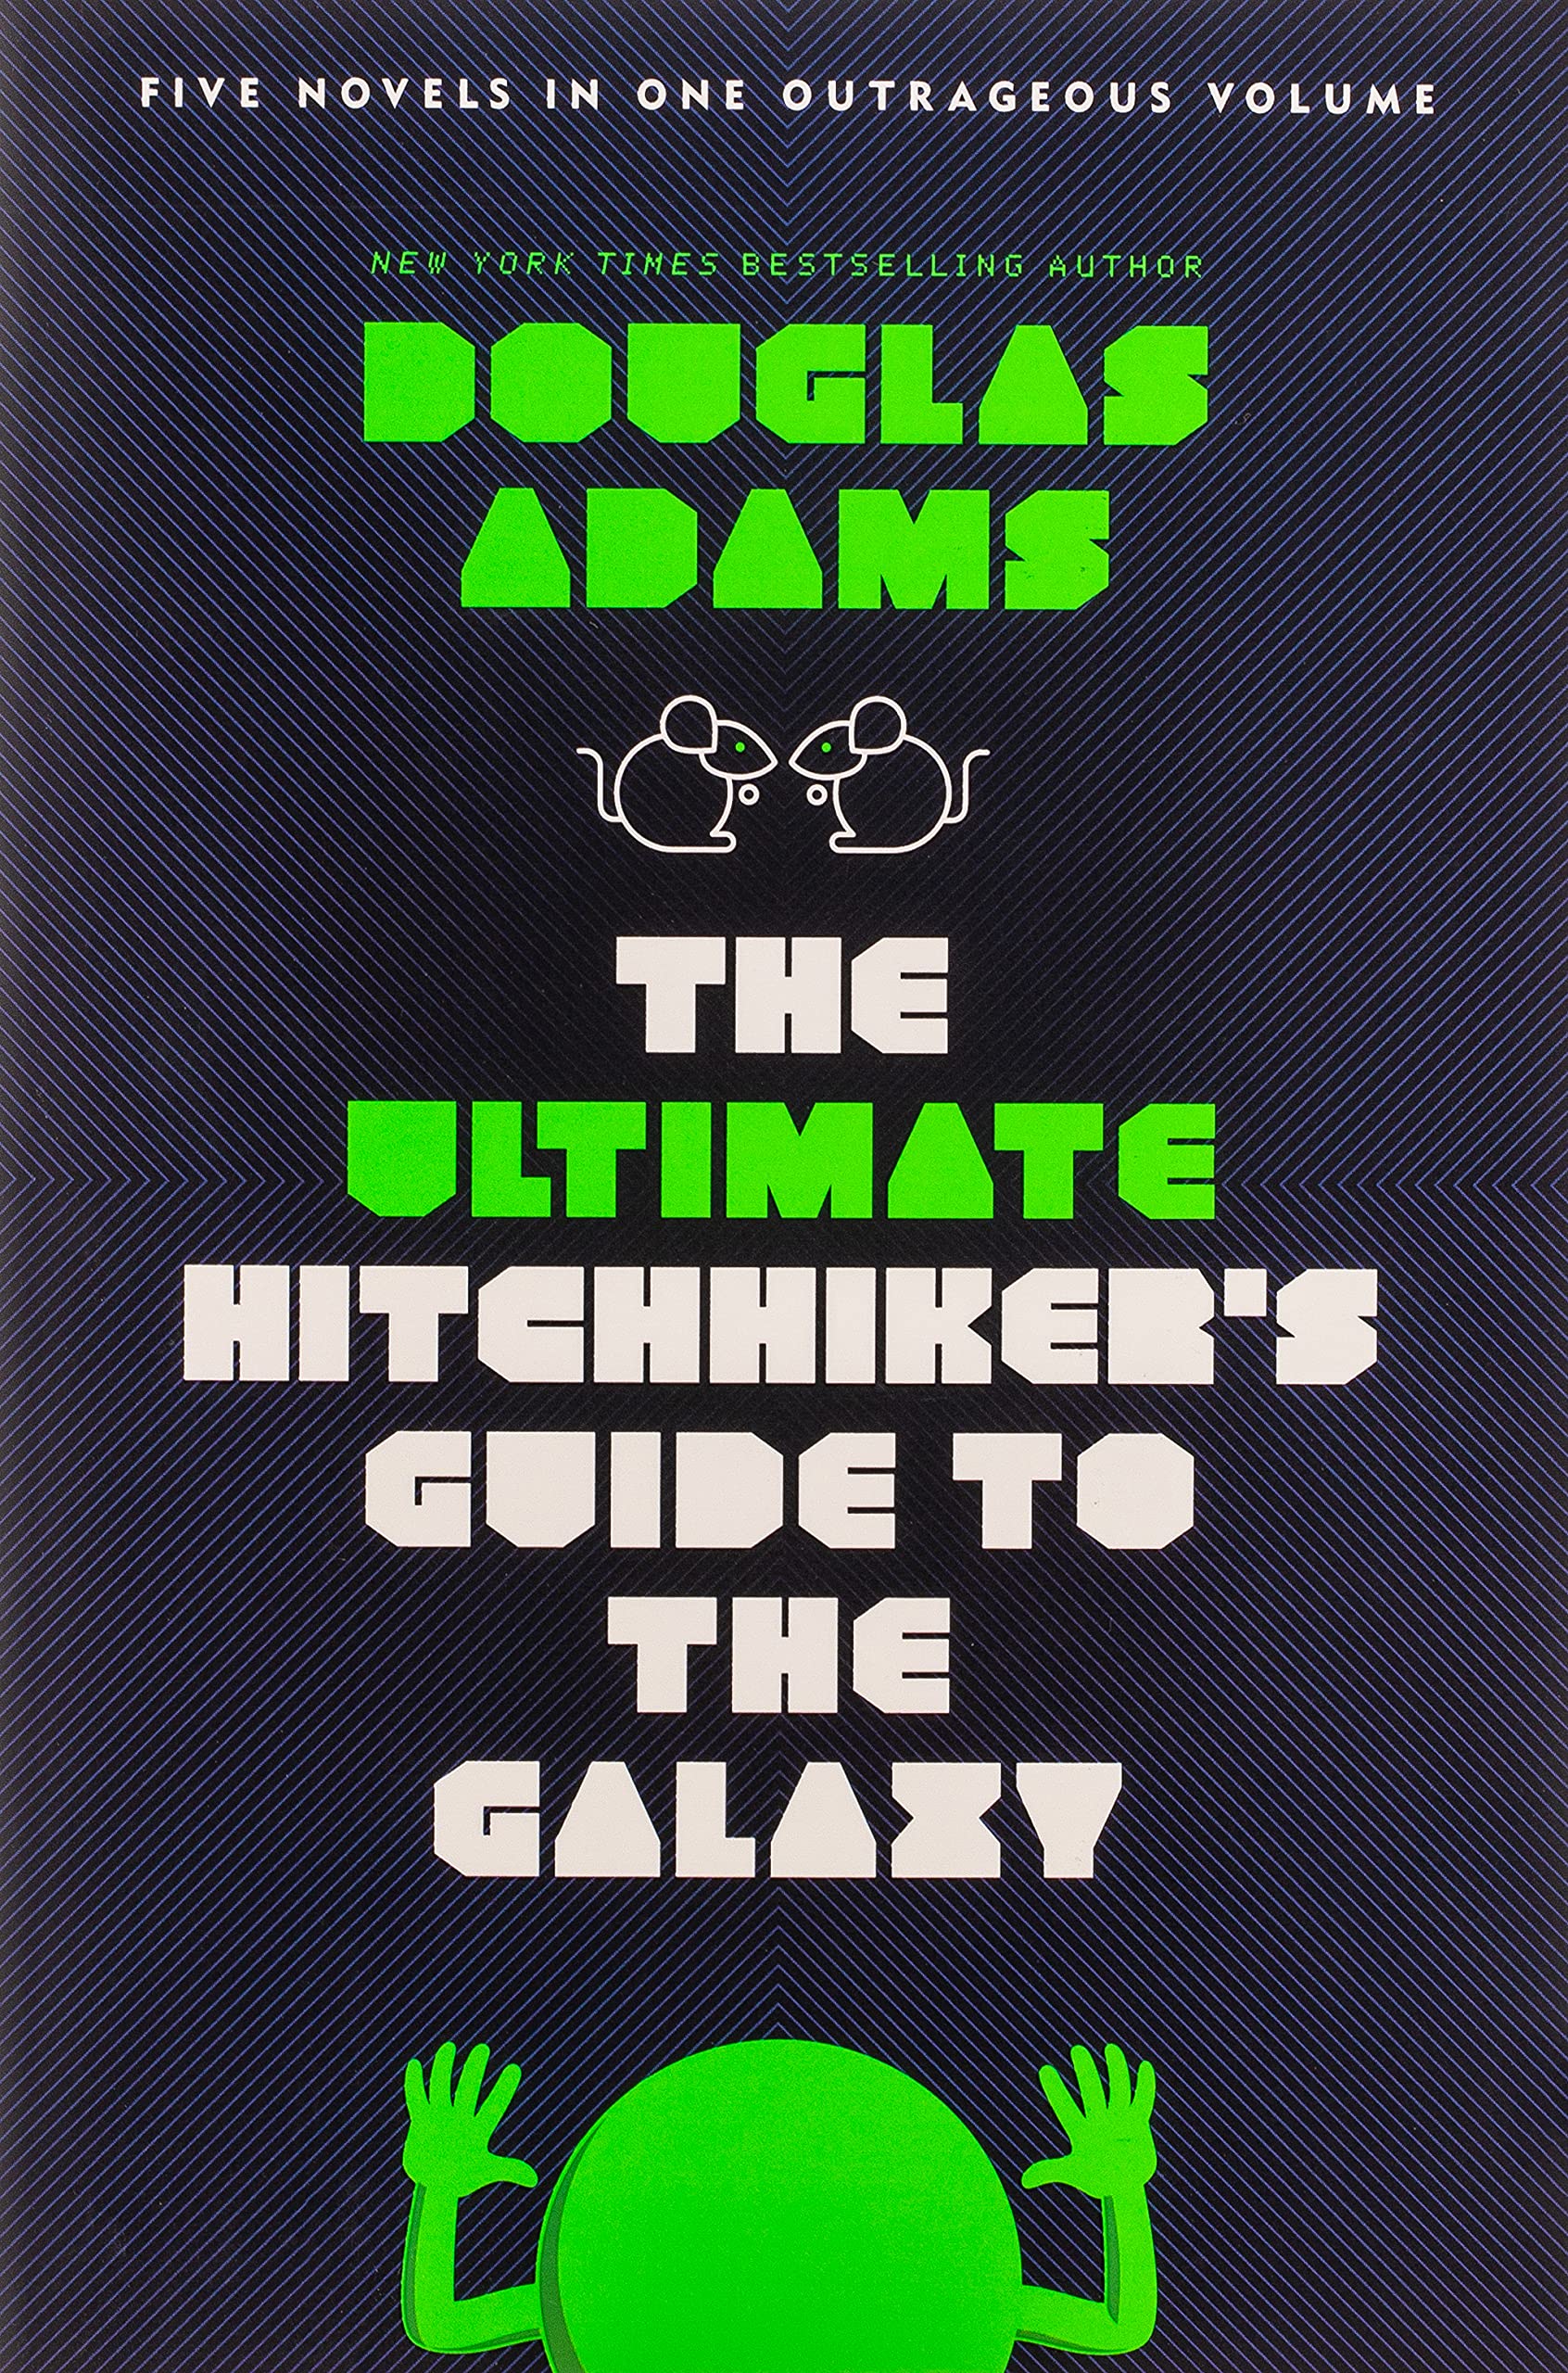 Cover of The Ultimate Hitchhiker's Guide to the Galaxy (Hitchhiker's Guide to the Galaxy, #1-5)